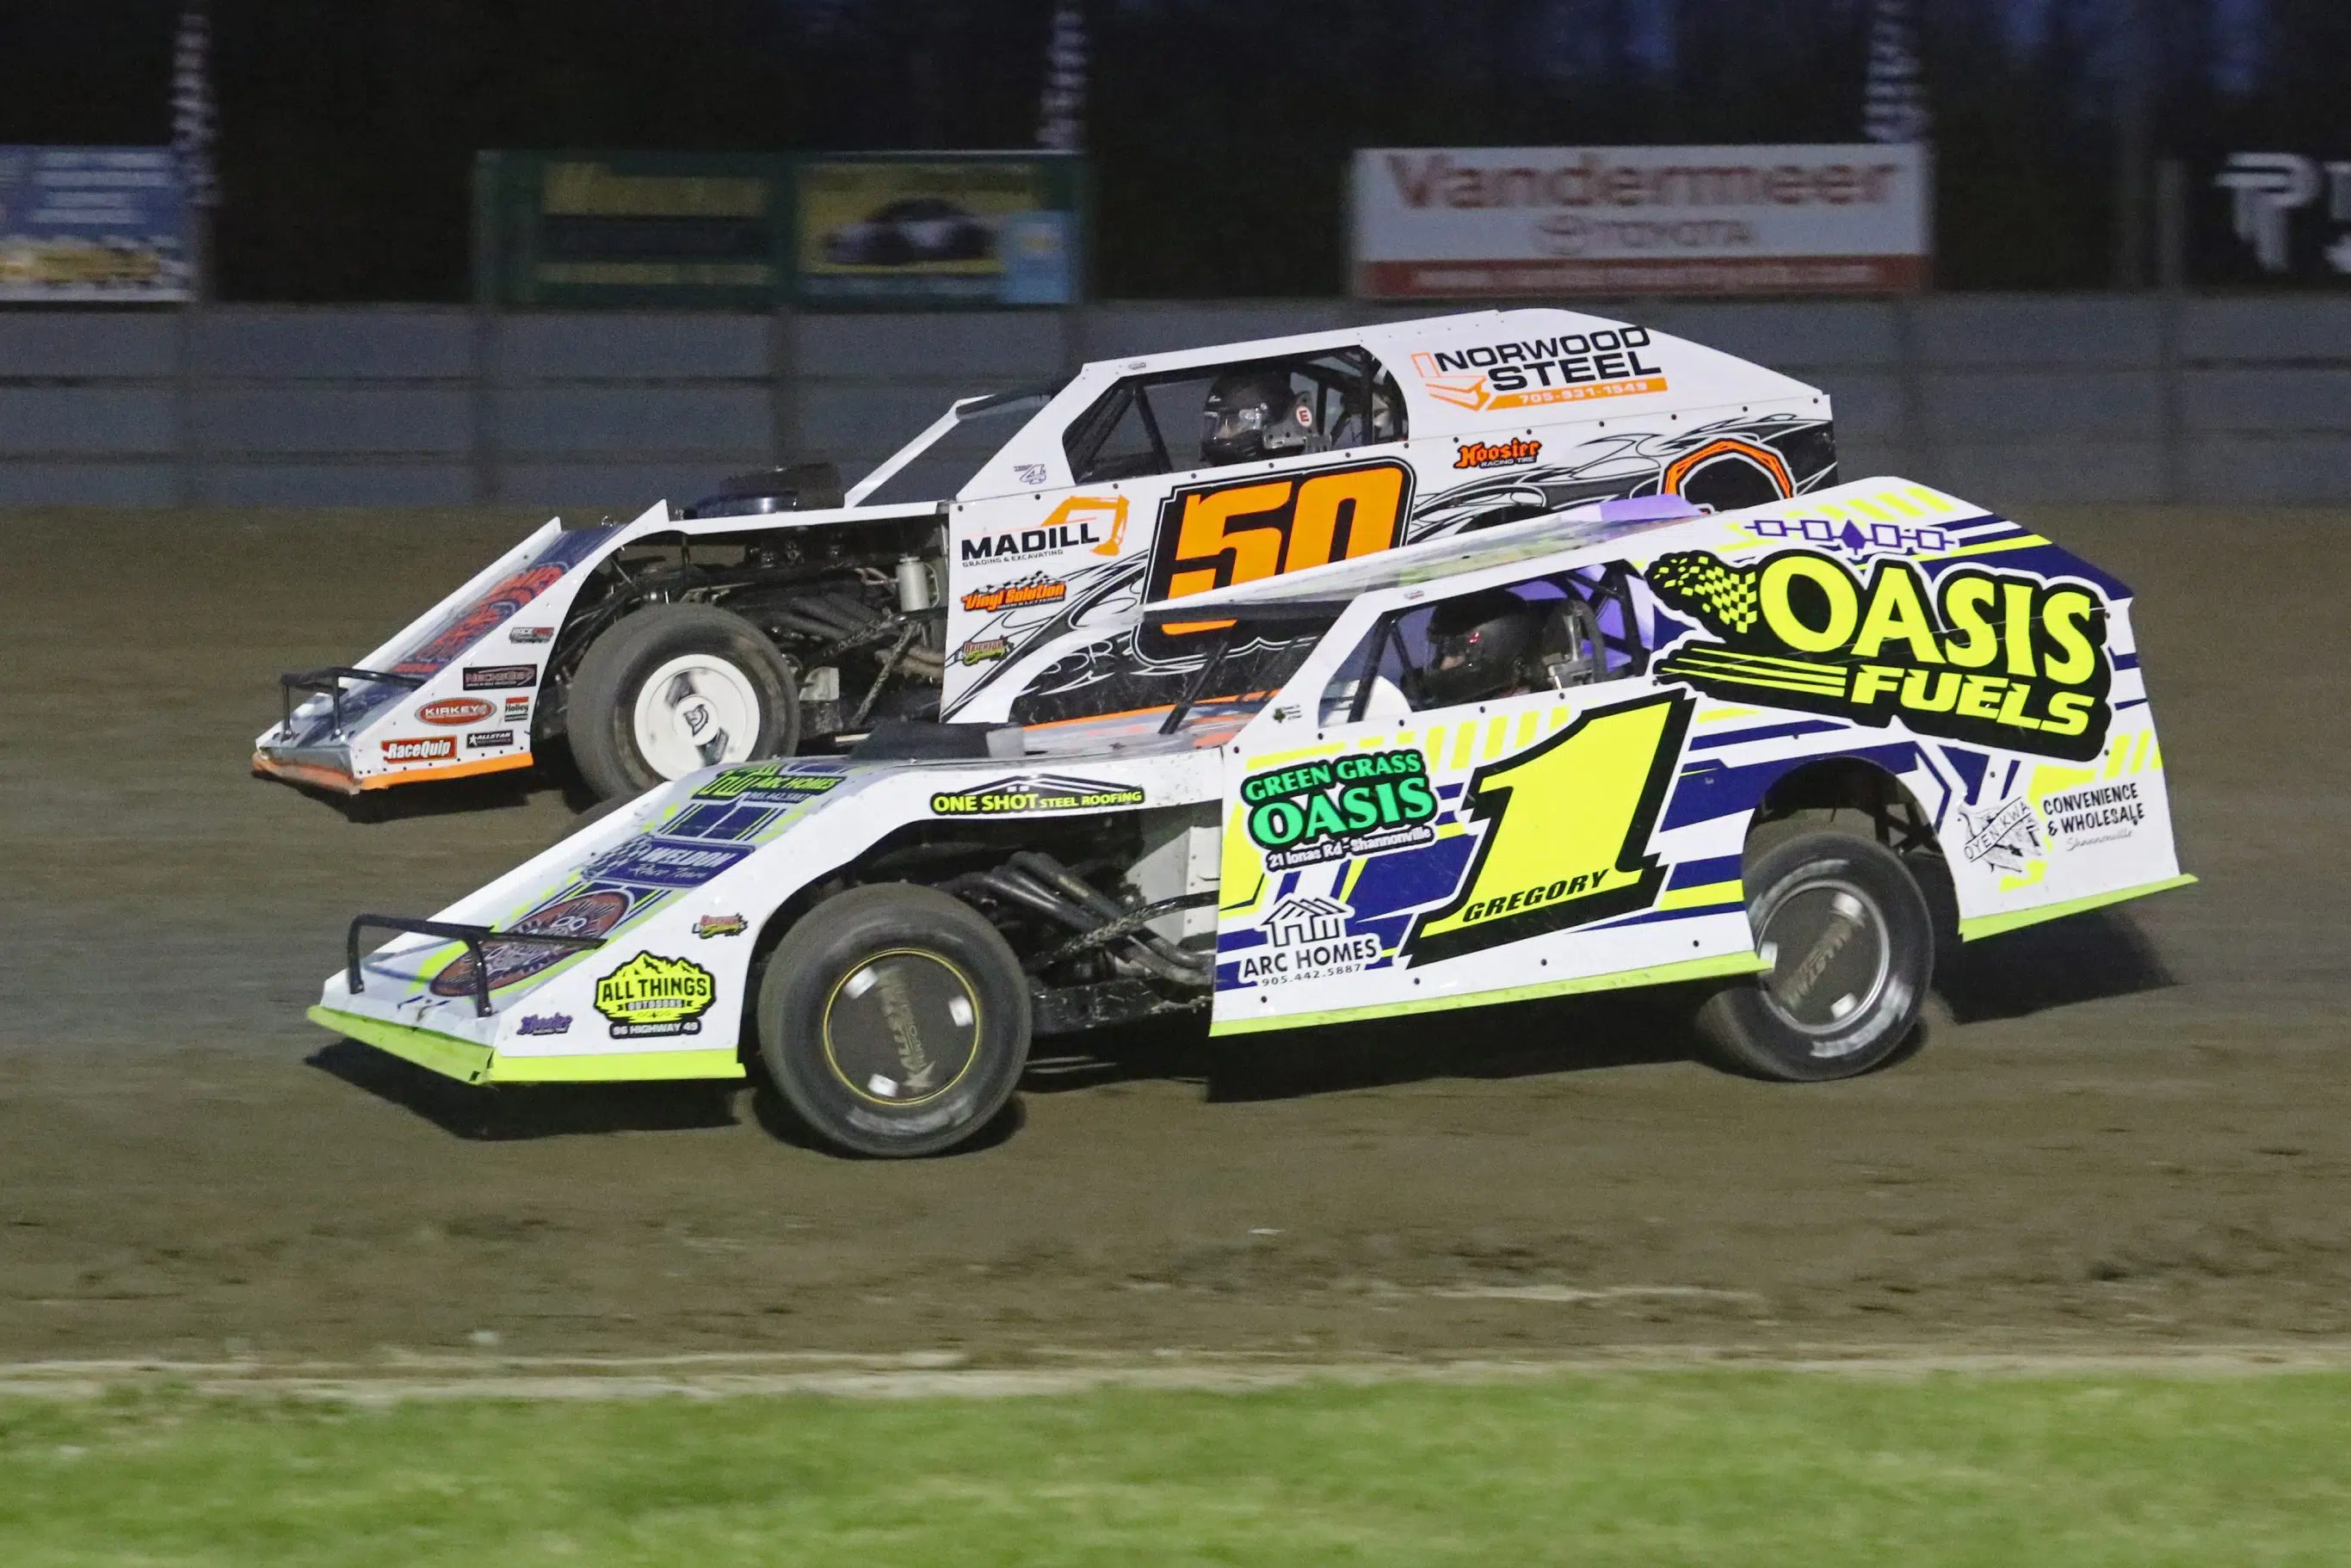 Sopaz and Gregory get first wins at Brighton Speedway